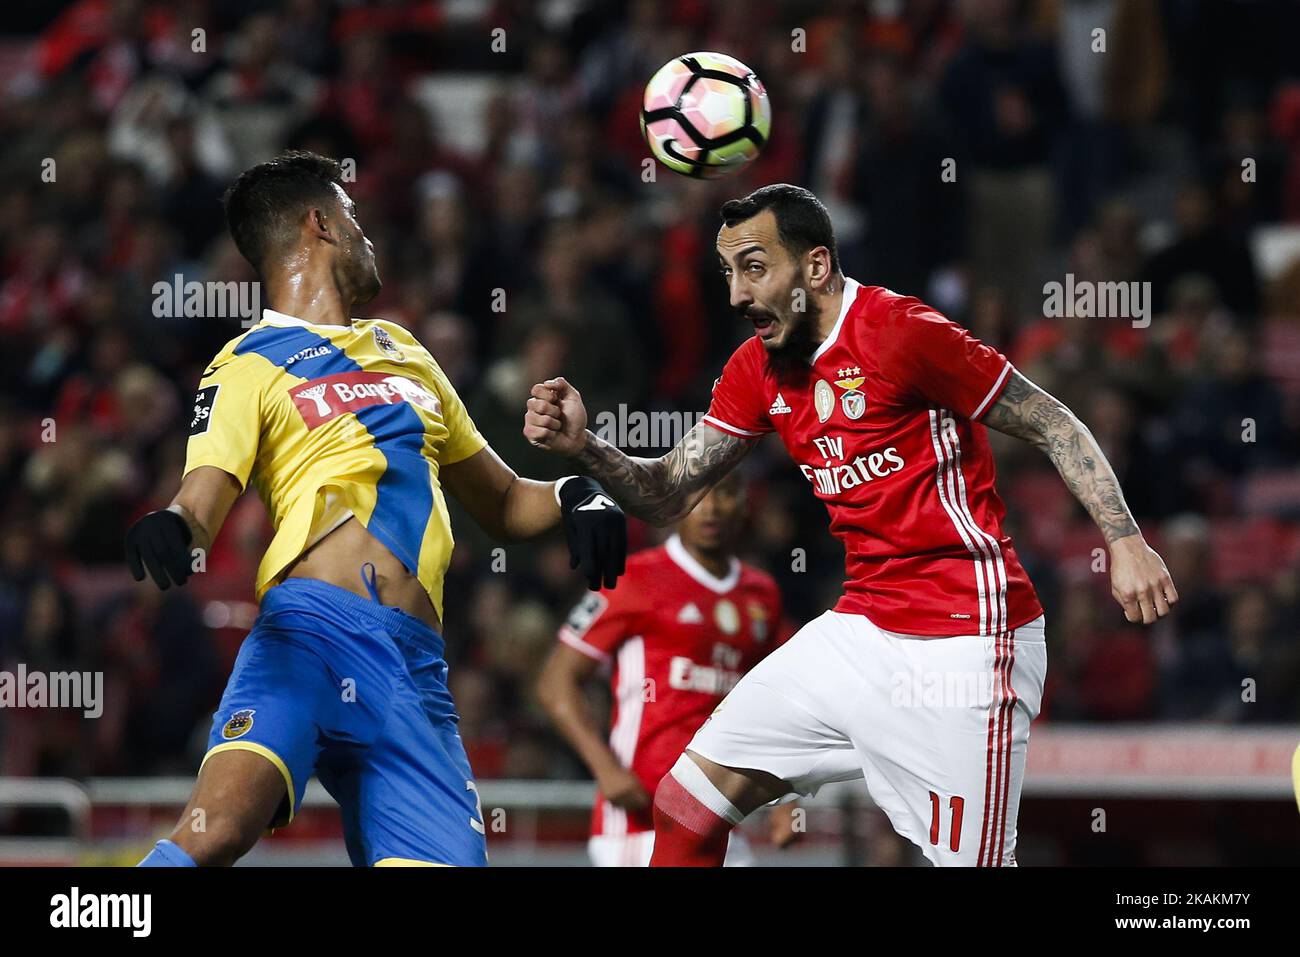 Benfica's forward Kostas Mitroglou (R) vies for the ball with Arouca's defender Jubal (L) during Premier League 2016/17 match between SL Benfica vs FC Arouca, in Lisbon, on February 10, 2017. (Photo by Carlos Palma/NurPhoto) *** Please Use Credit from Credit Field *** Stock Photo